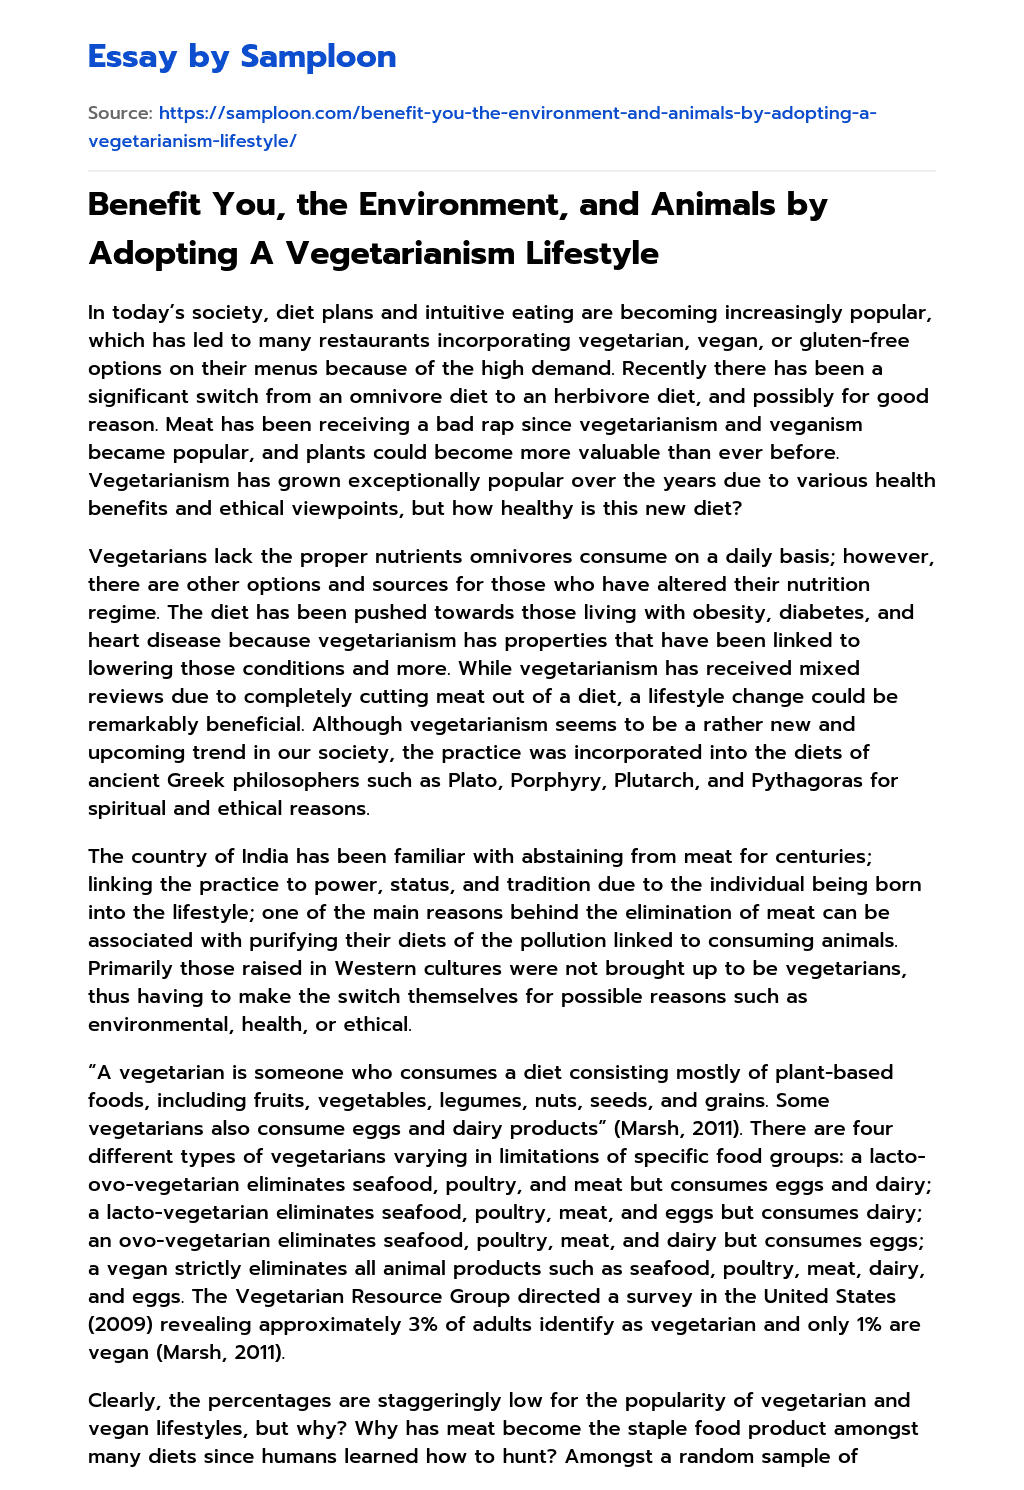 Benefit You, the Environment, and Animals by Adopting A Vegetarianism Lifestyle essay